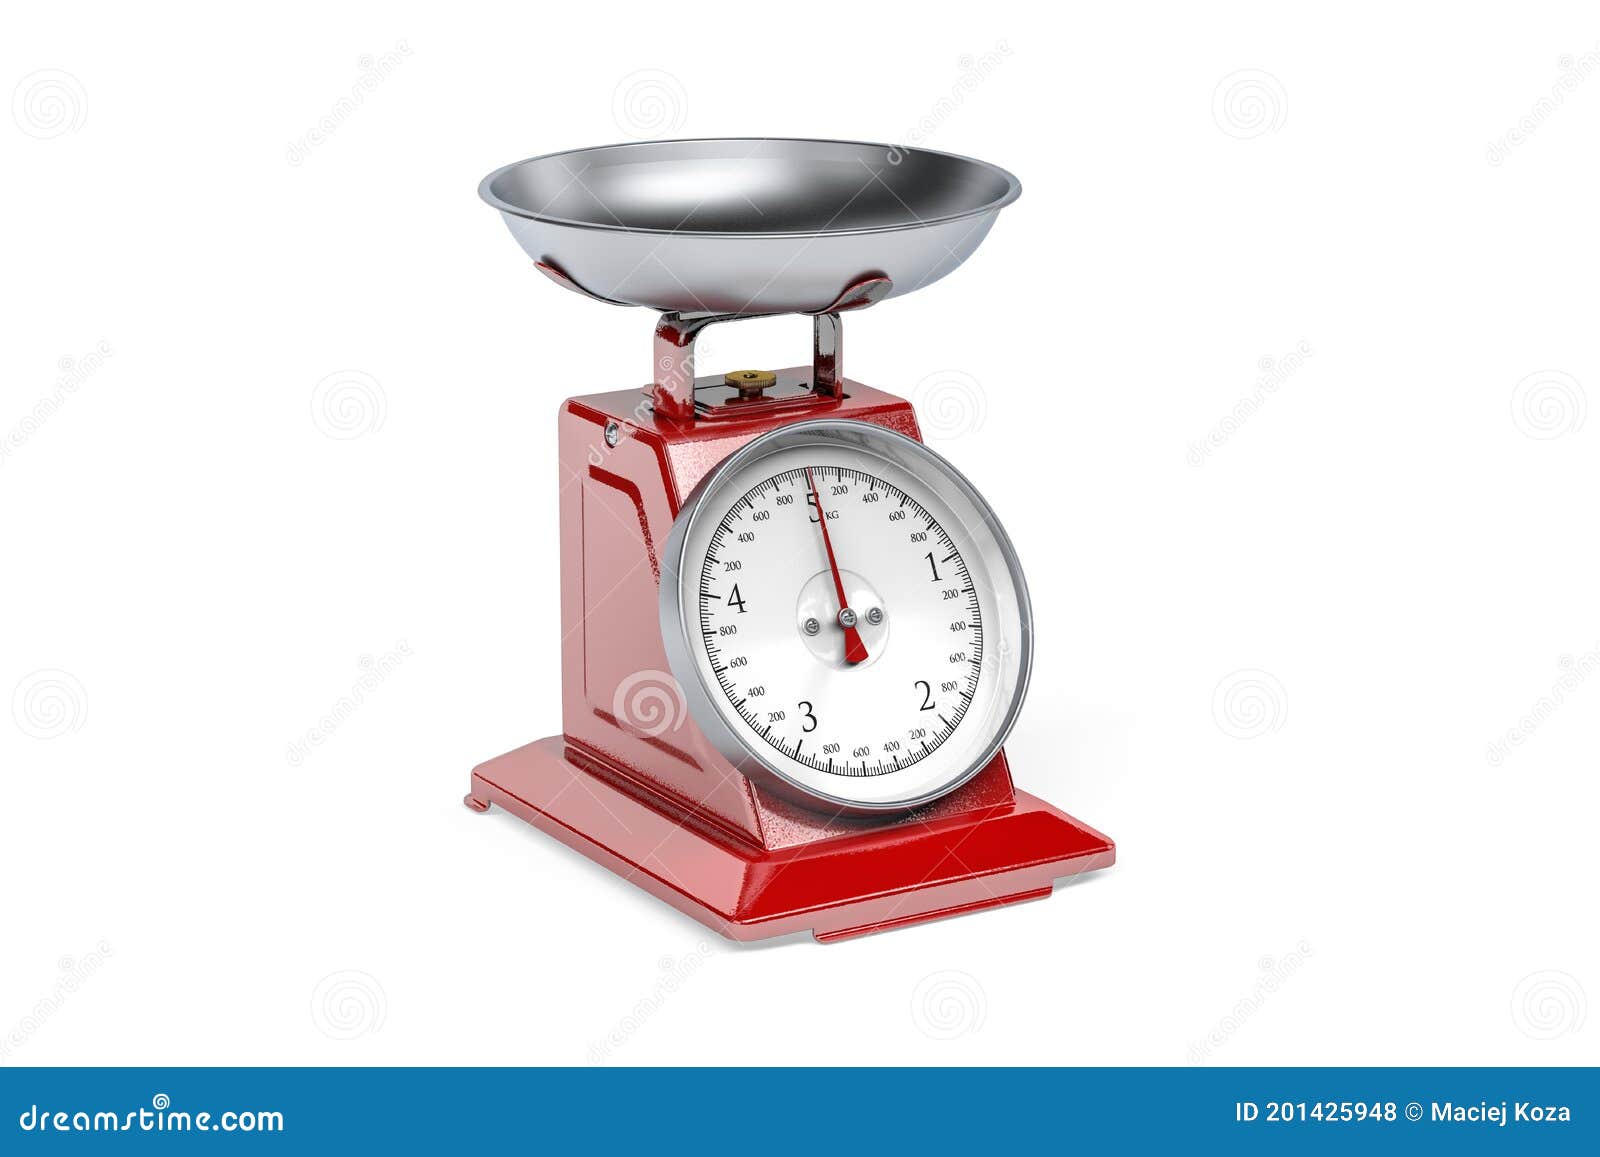 A Red Analog Food Scale Isolated on a White Background Stock Illustration -  Illustration of device, machine: 201425948